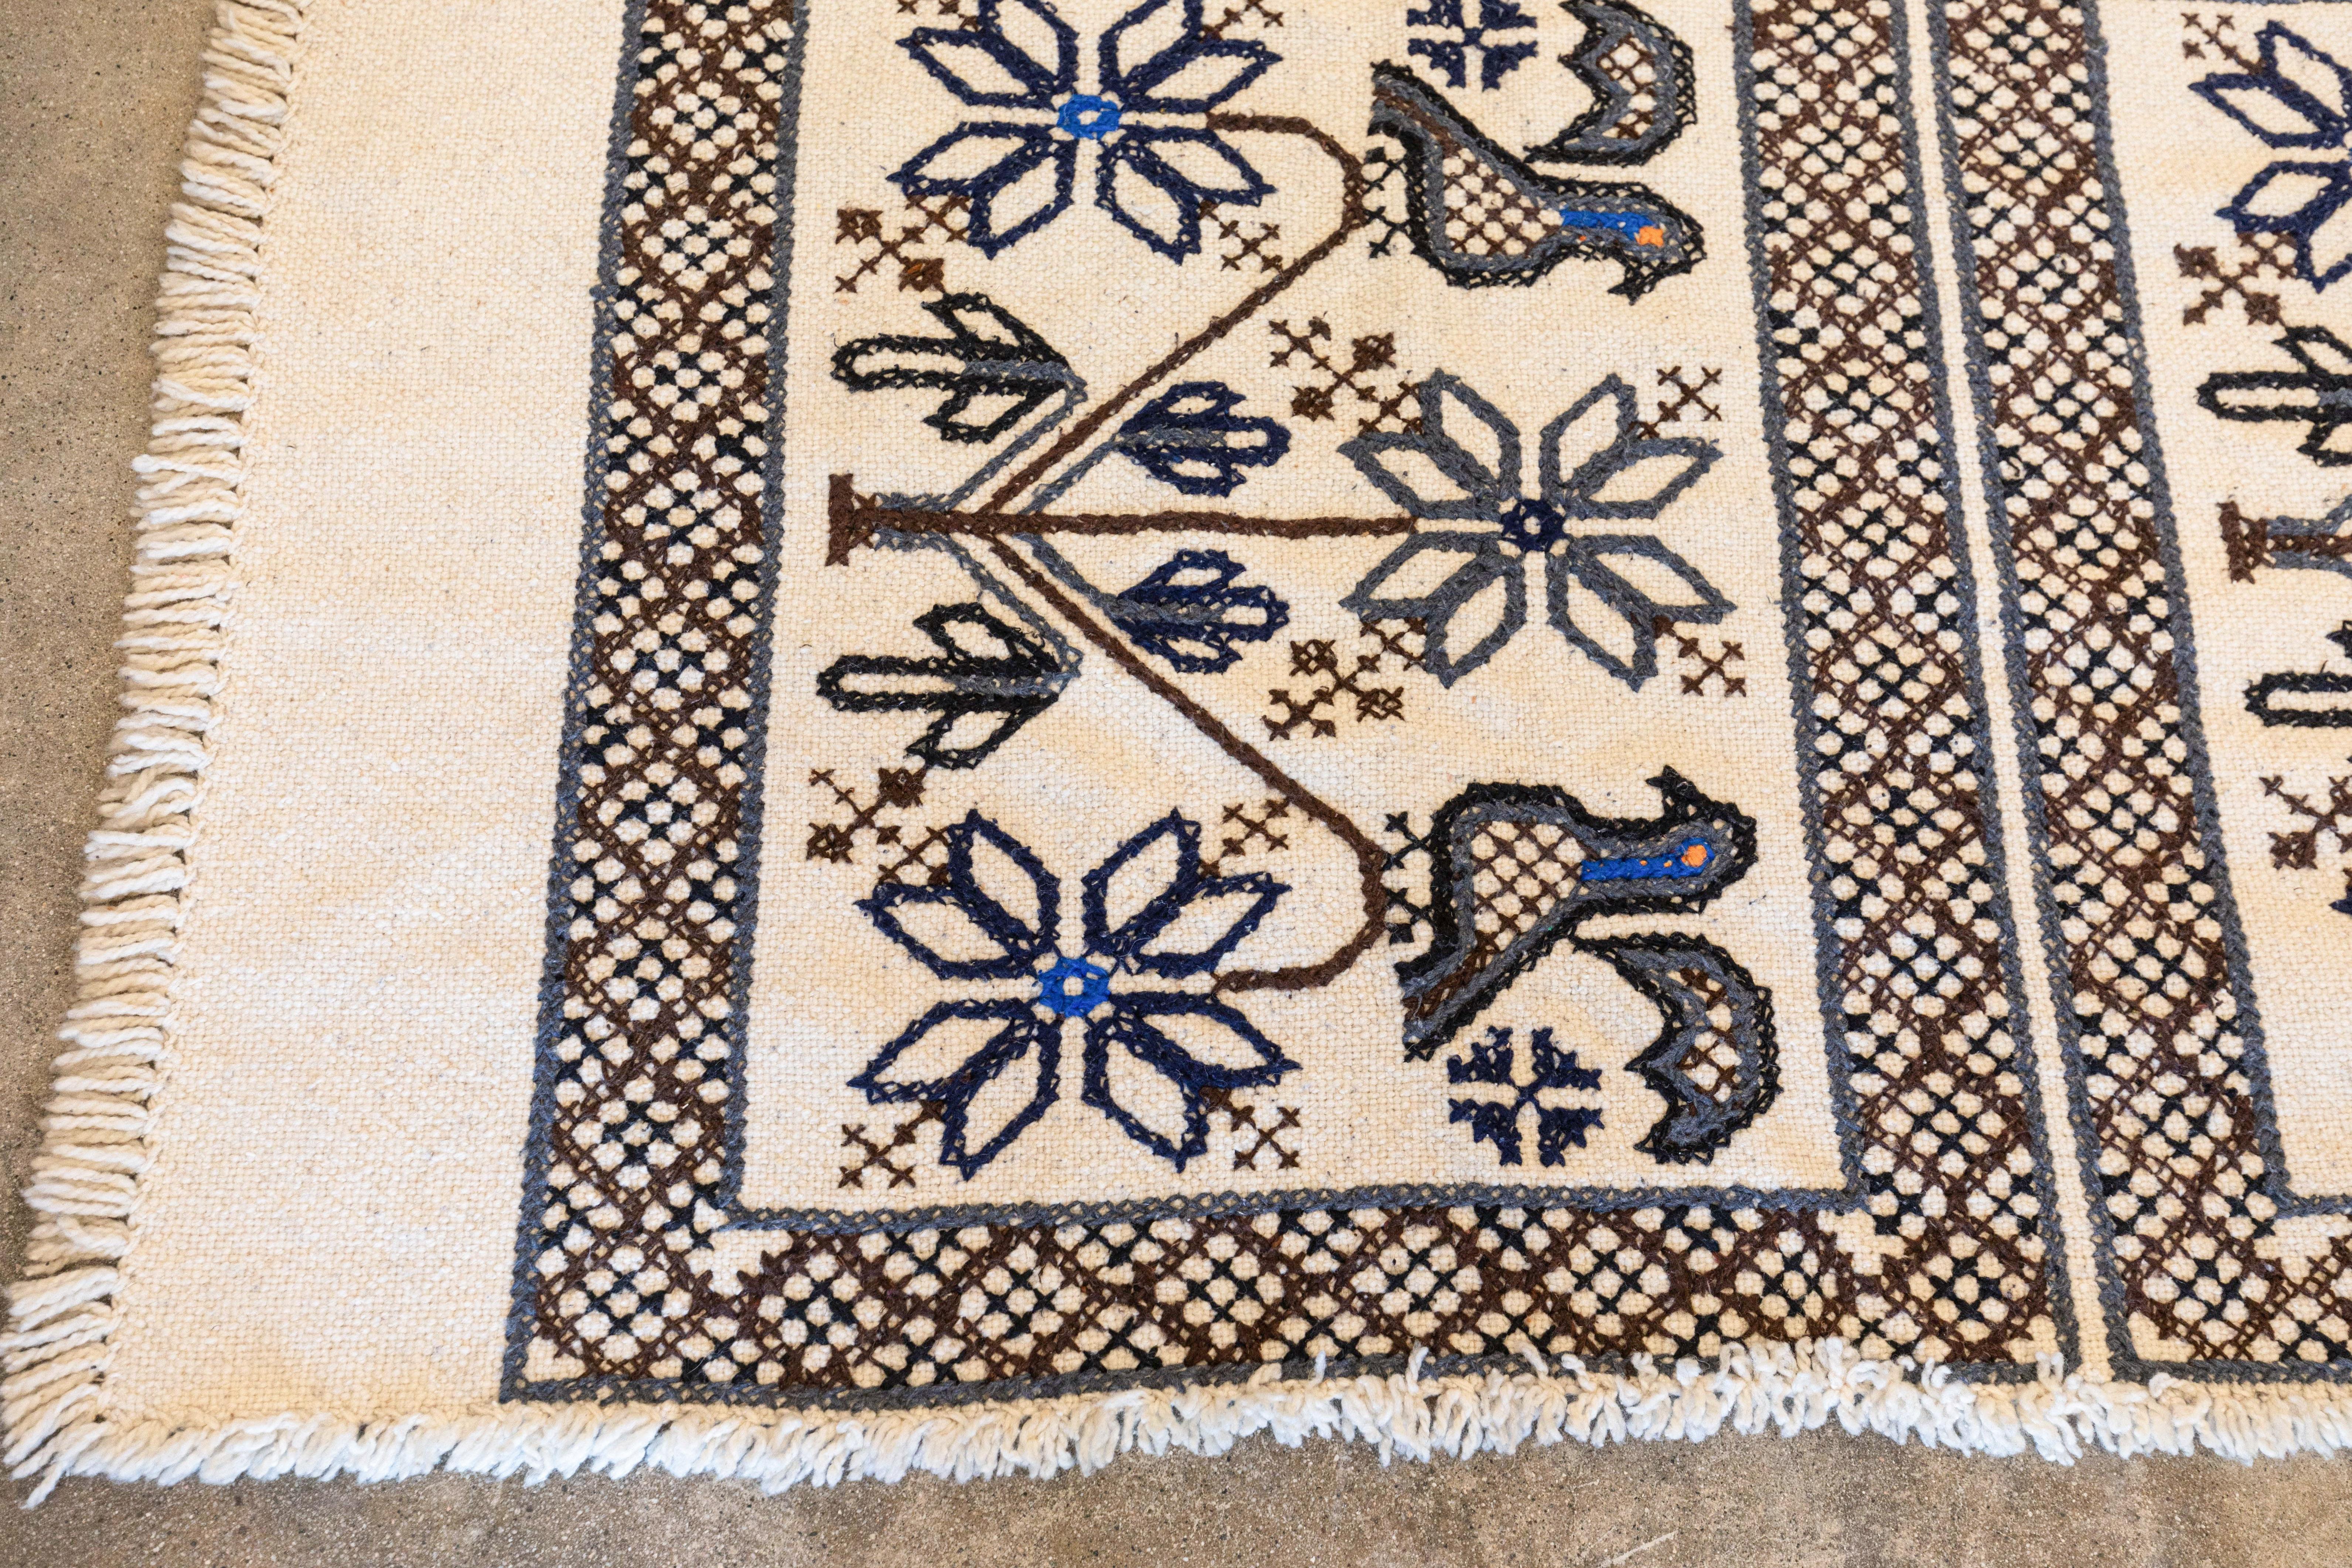 Wool Large 1950s Vintage Mexican Textile with Geometric Cross Stitch Design and Birds